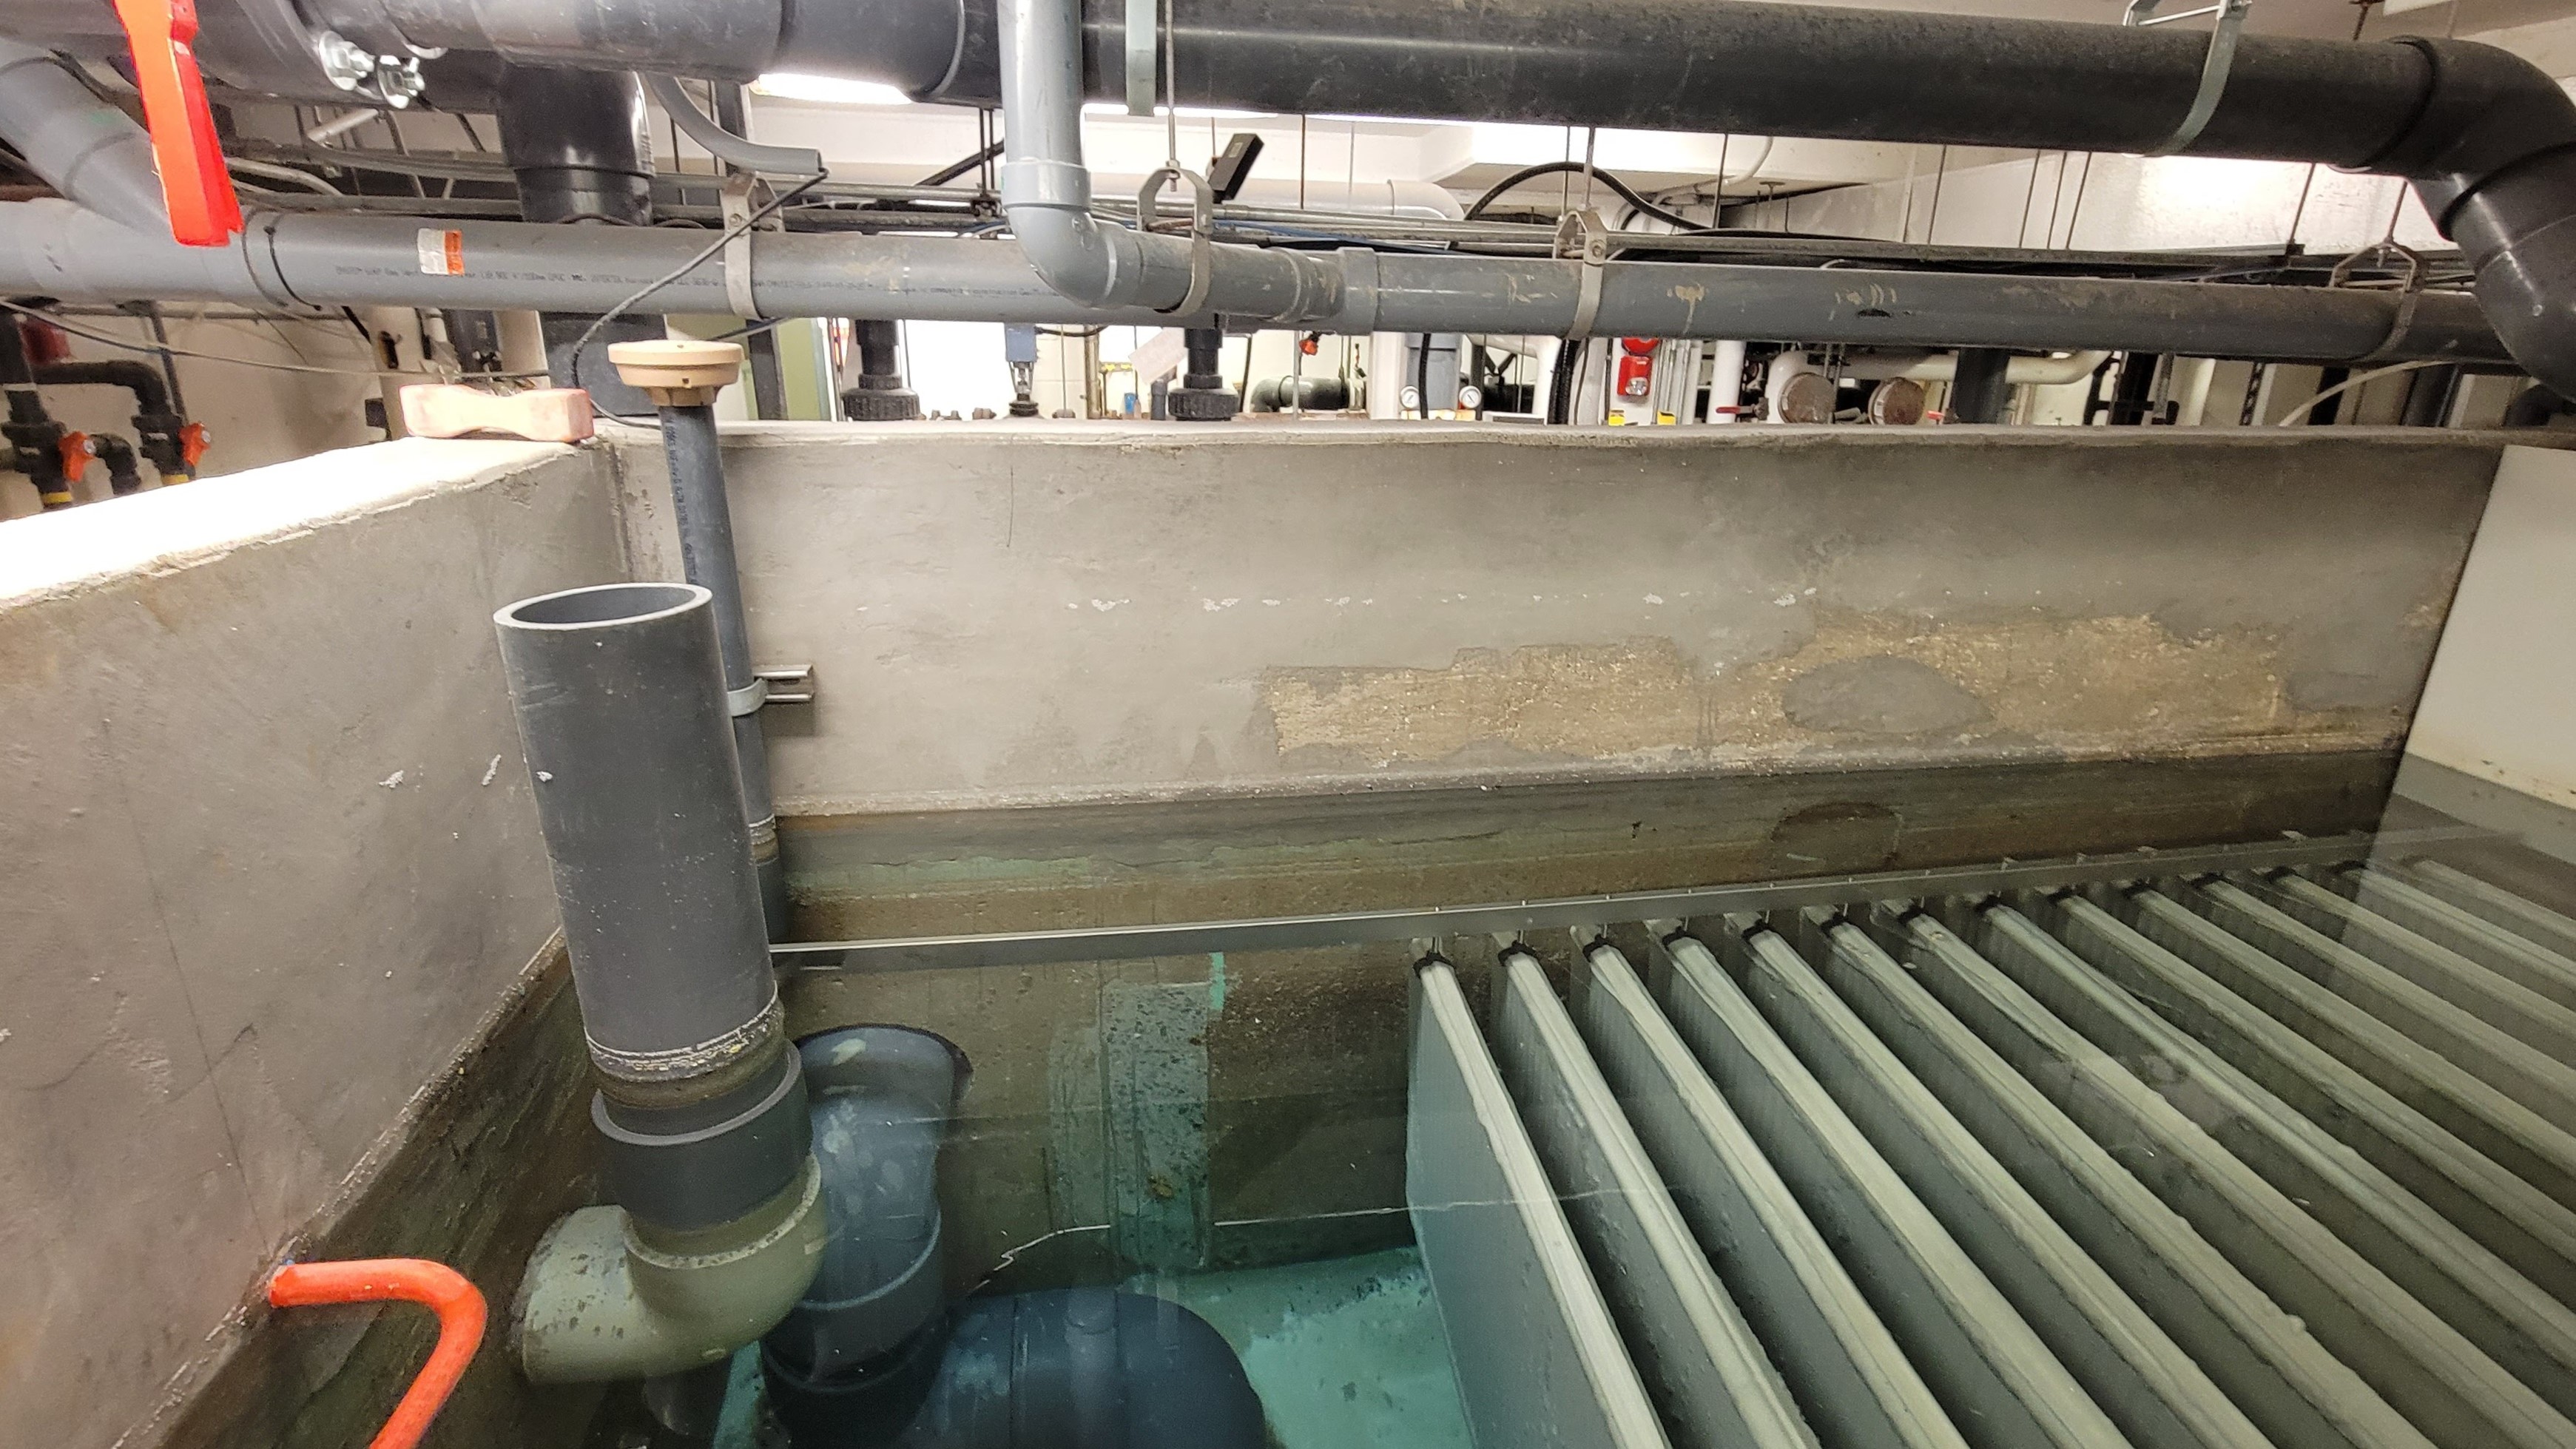 The filtration system of a pool, recently replaced.